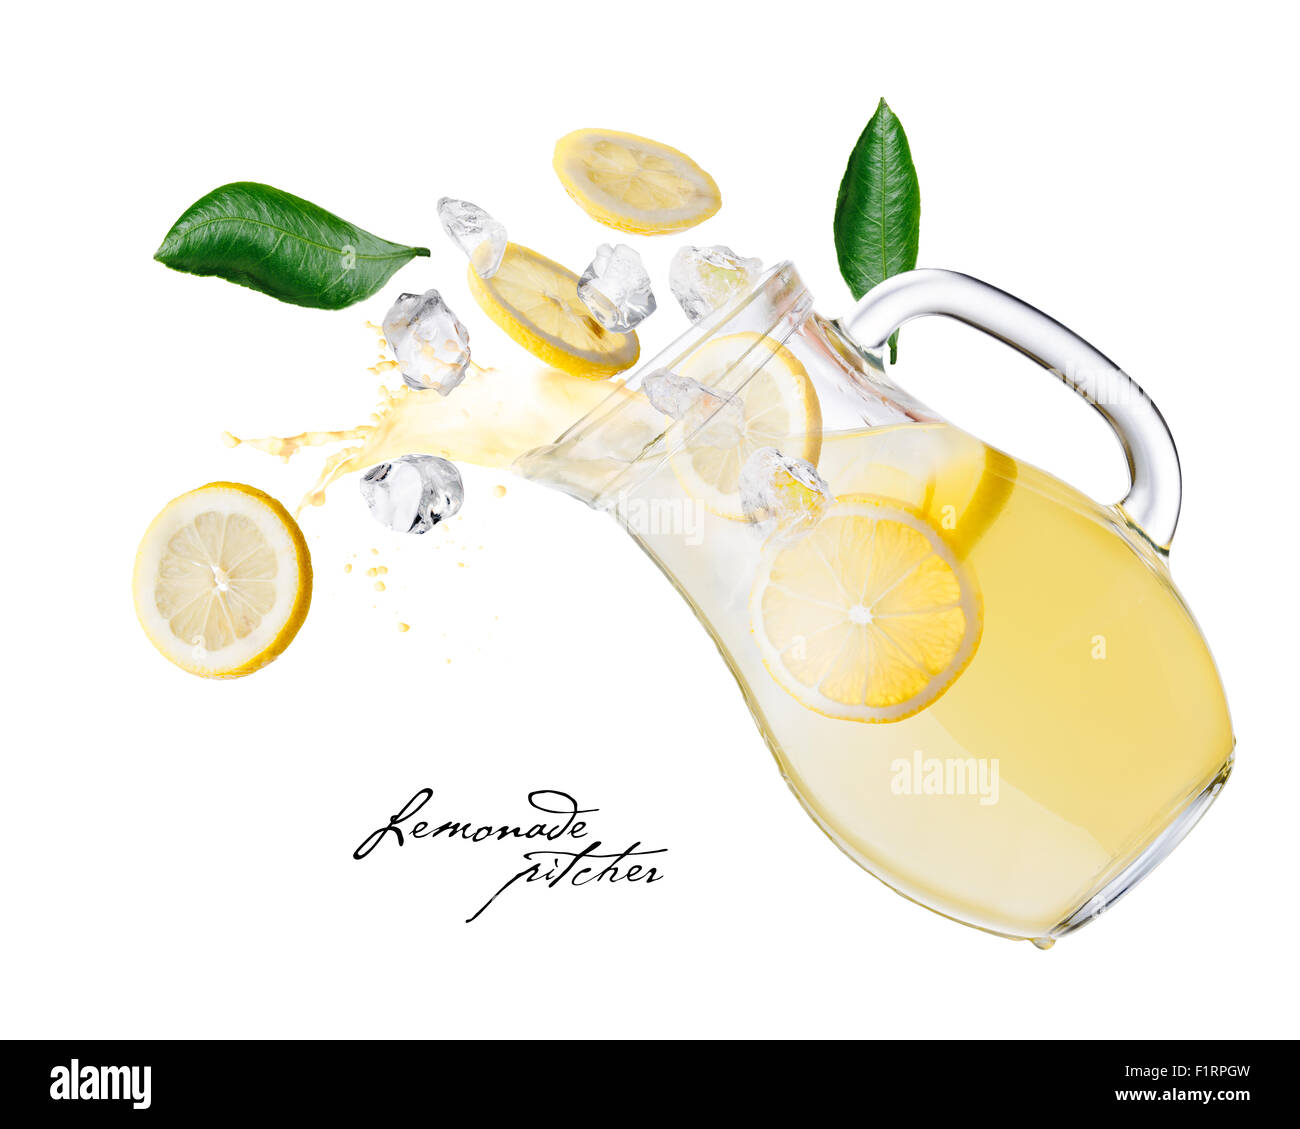 Falling down lemonade pitcher with splashes,lemon slices and ice